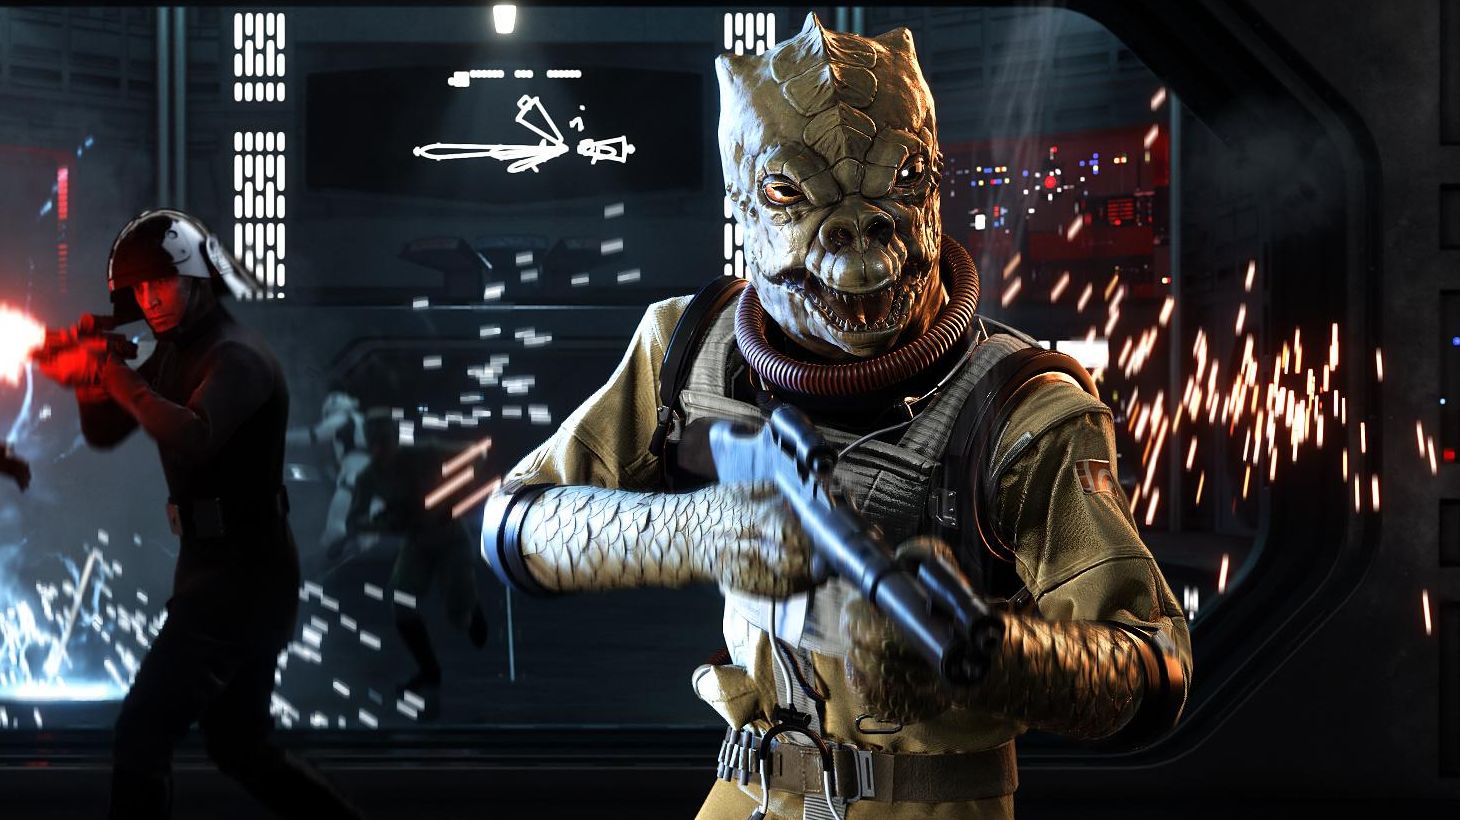 Bossk on the Death Star in Battlefront.